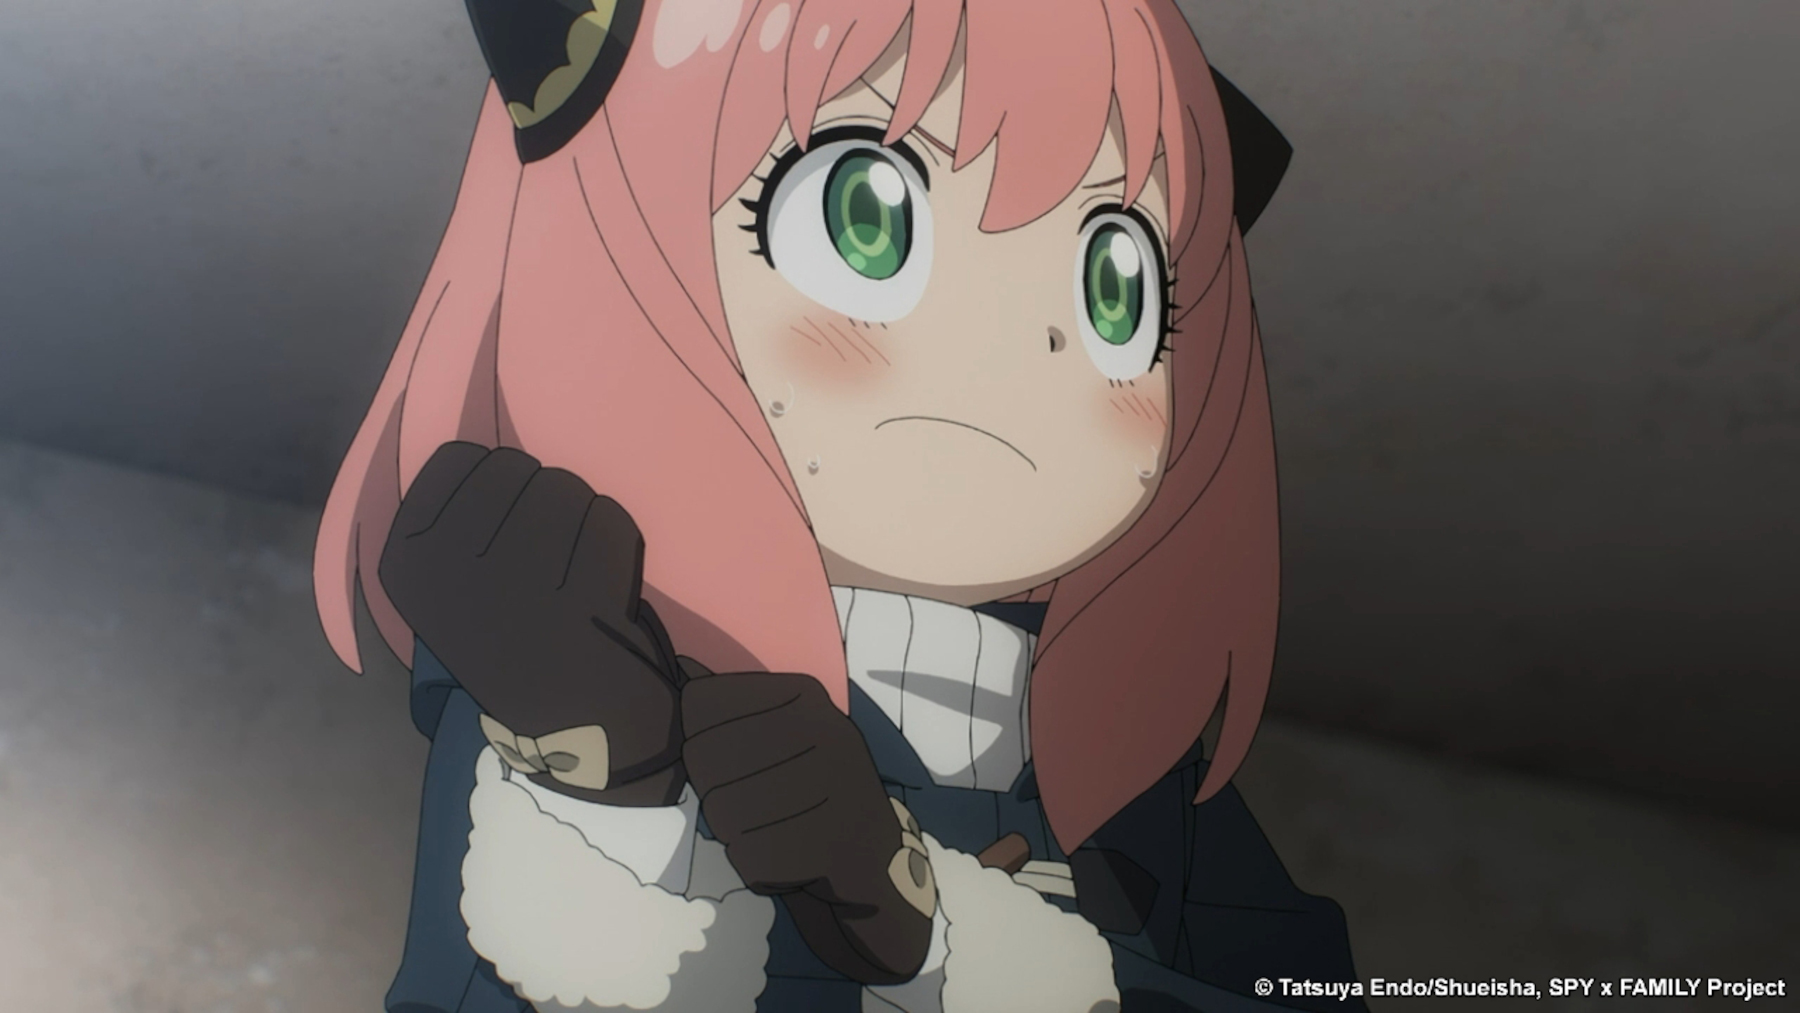 Anya Forger in 'Spy x Family,' which is 1 of our best anime streaming on Crunchyroll in October 2022. She's pulling a glove on and looks determined.